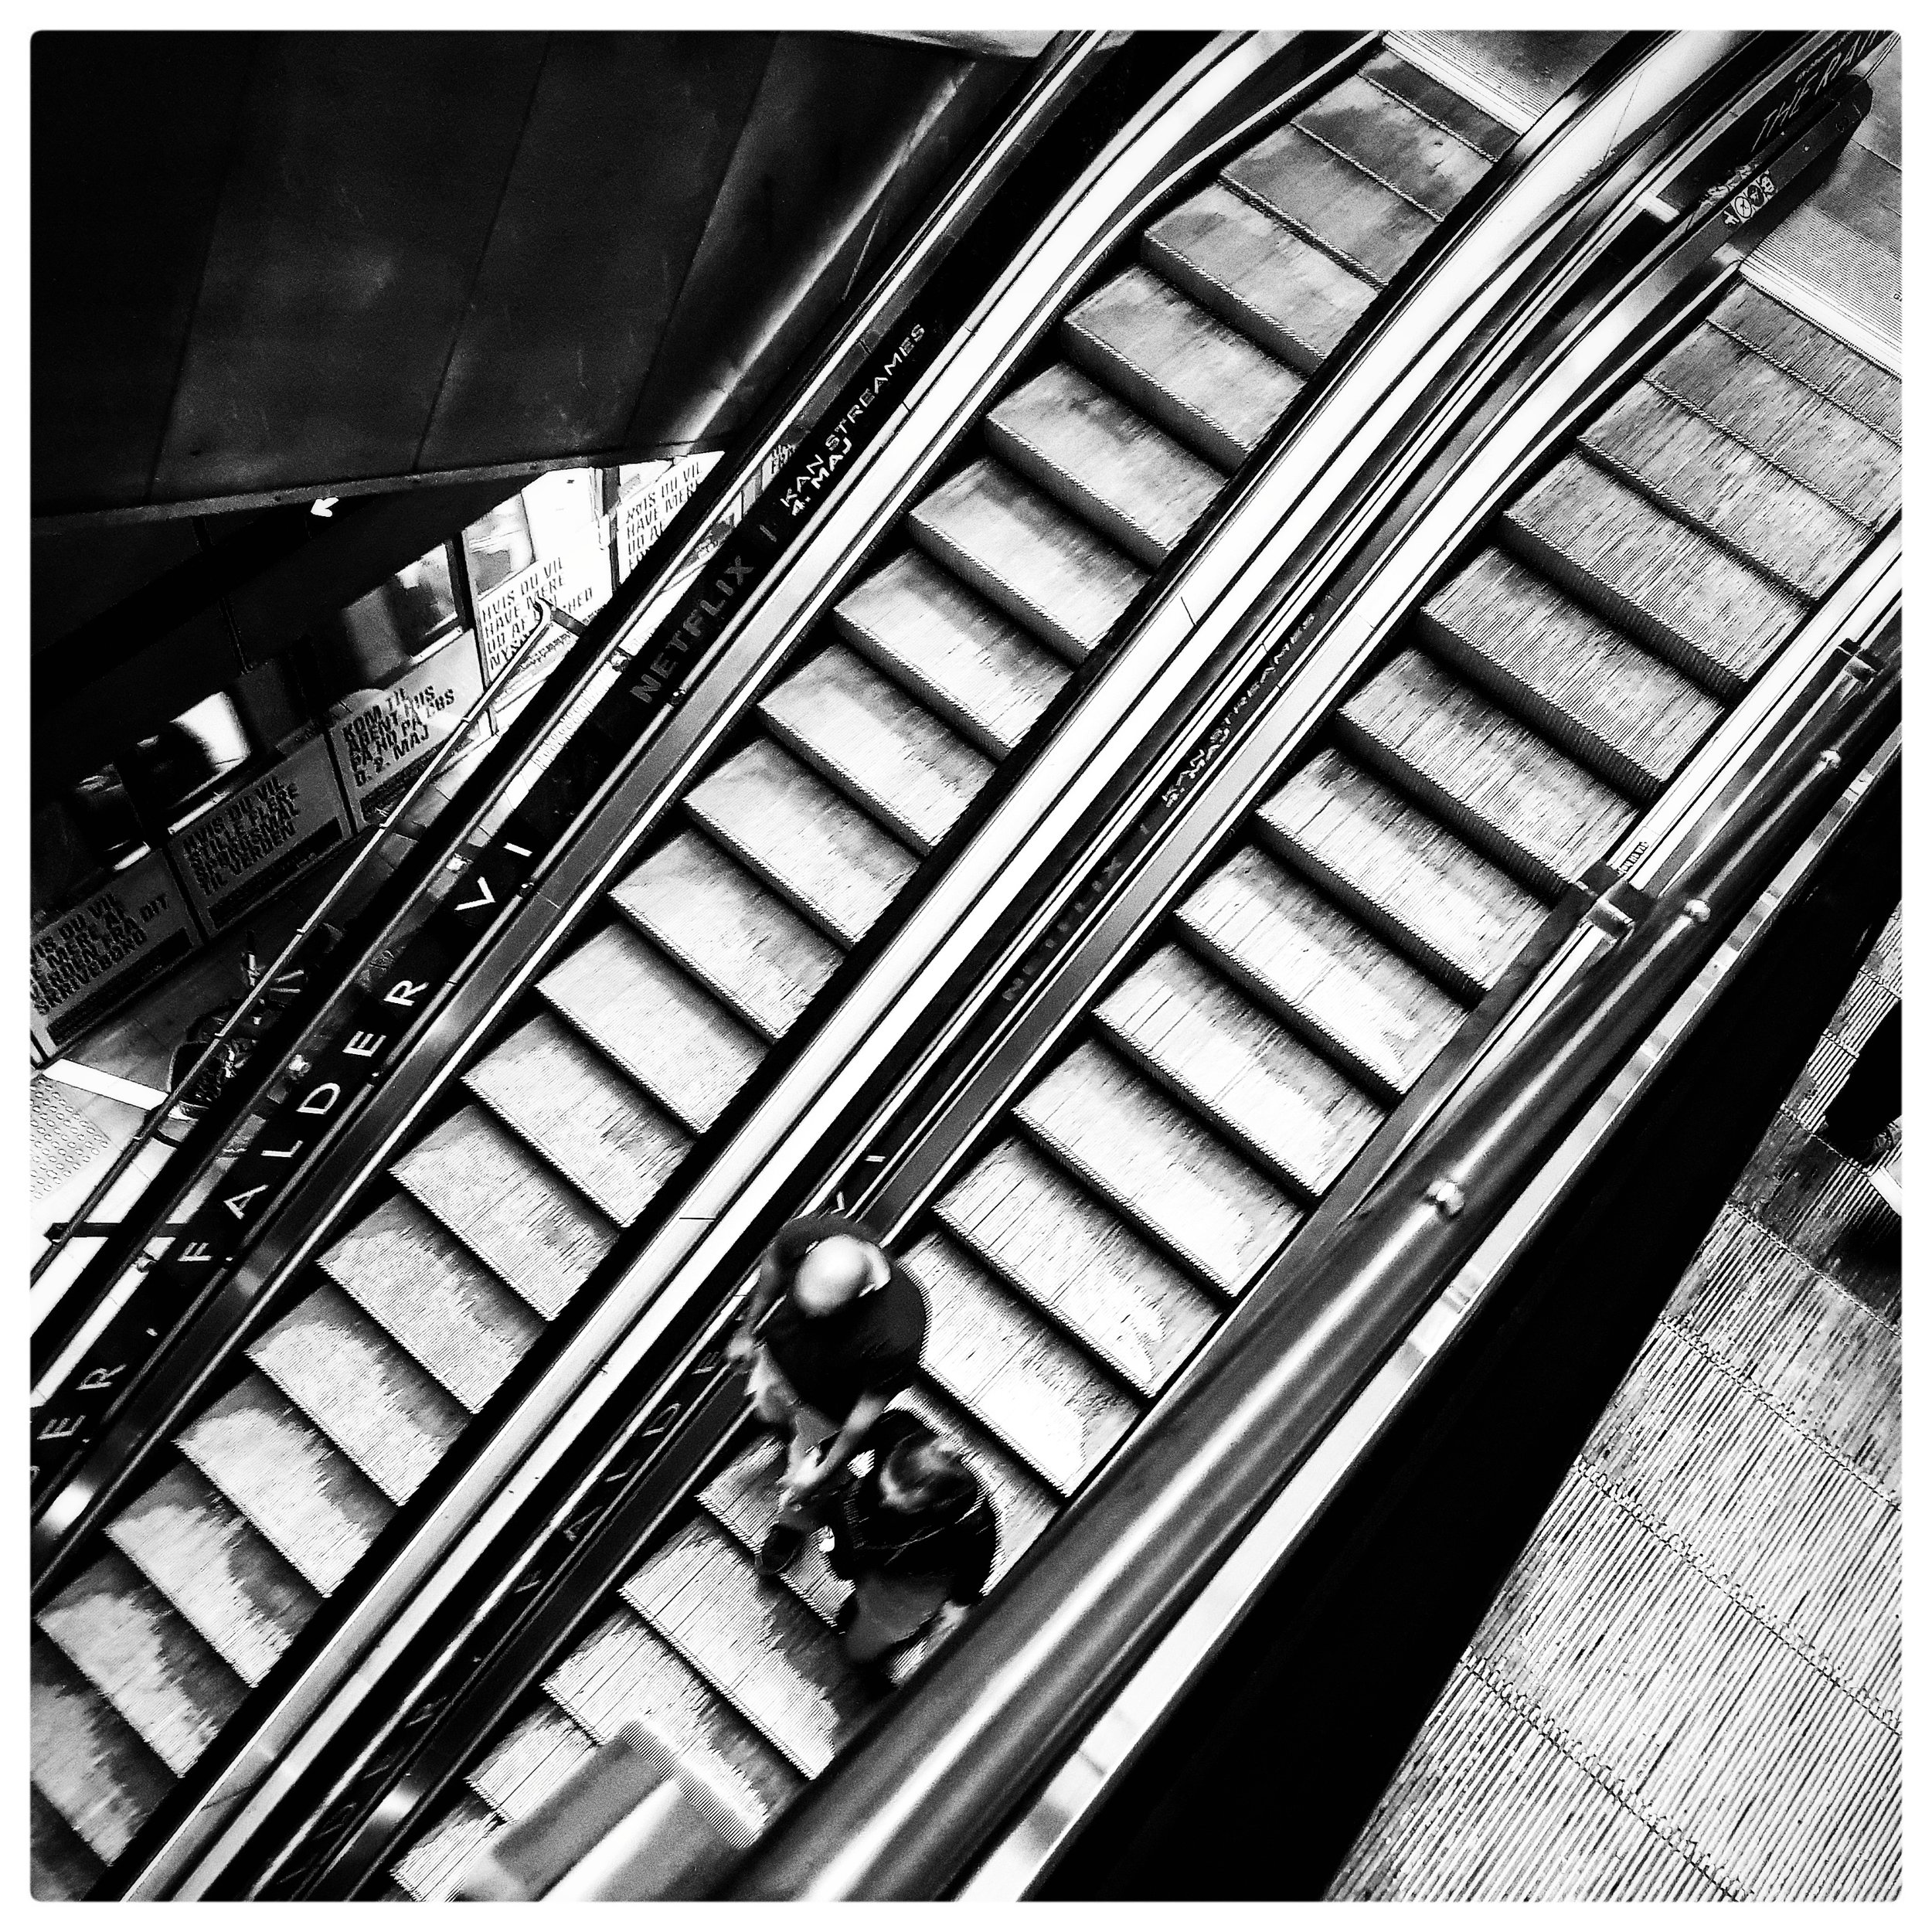 Day 119 - April 29: Two Commuters